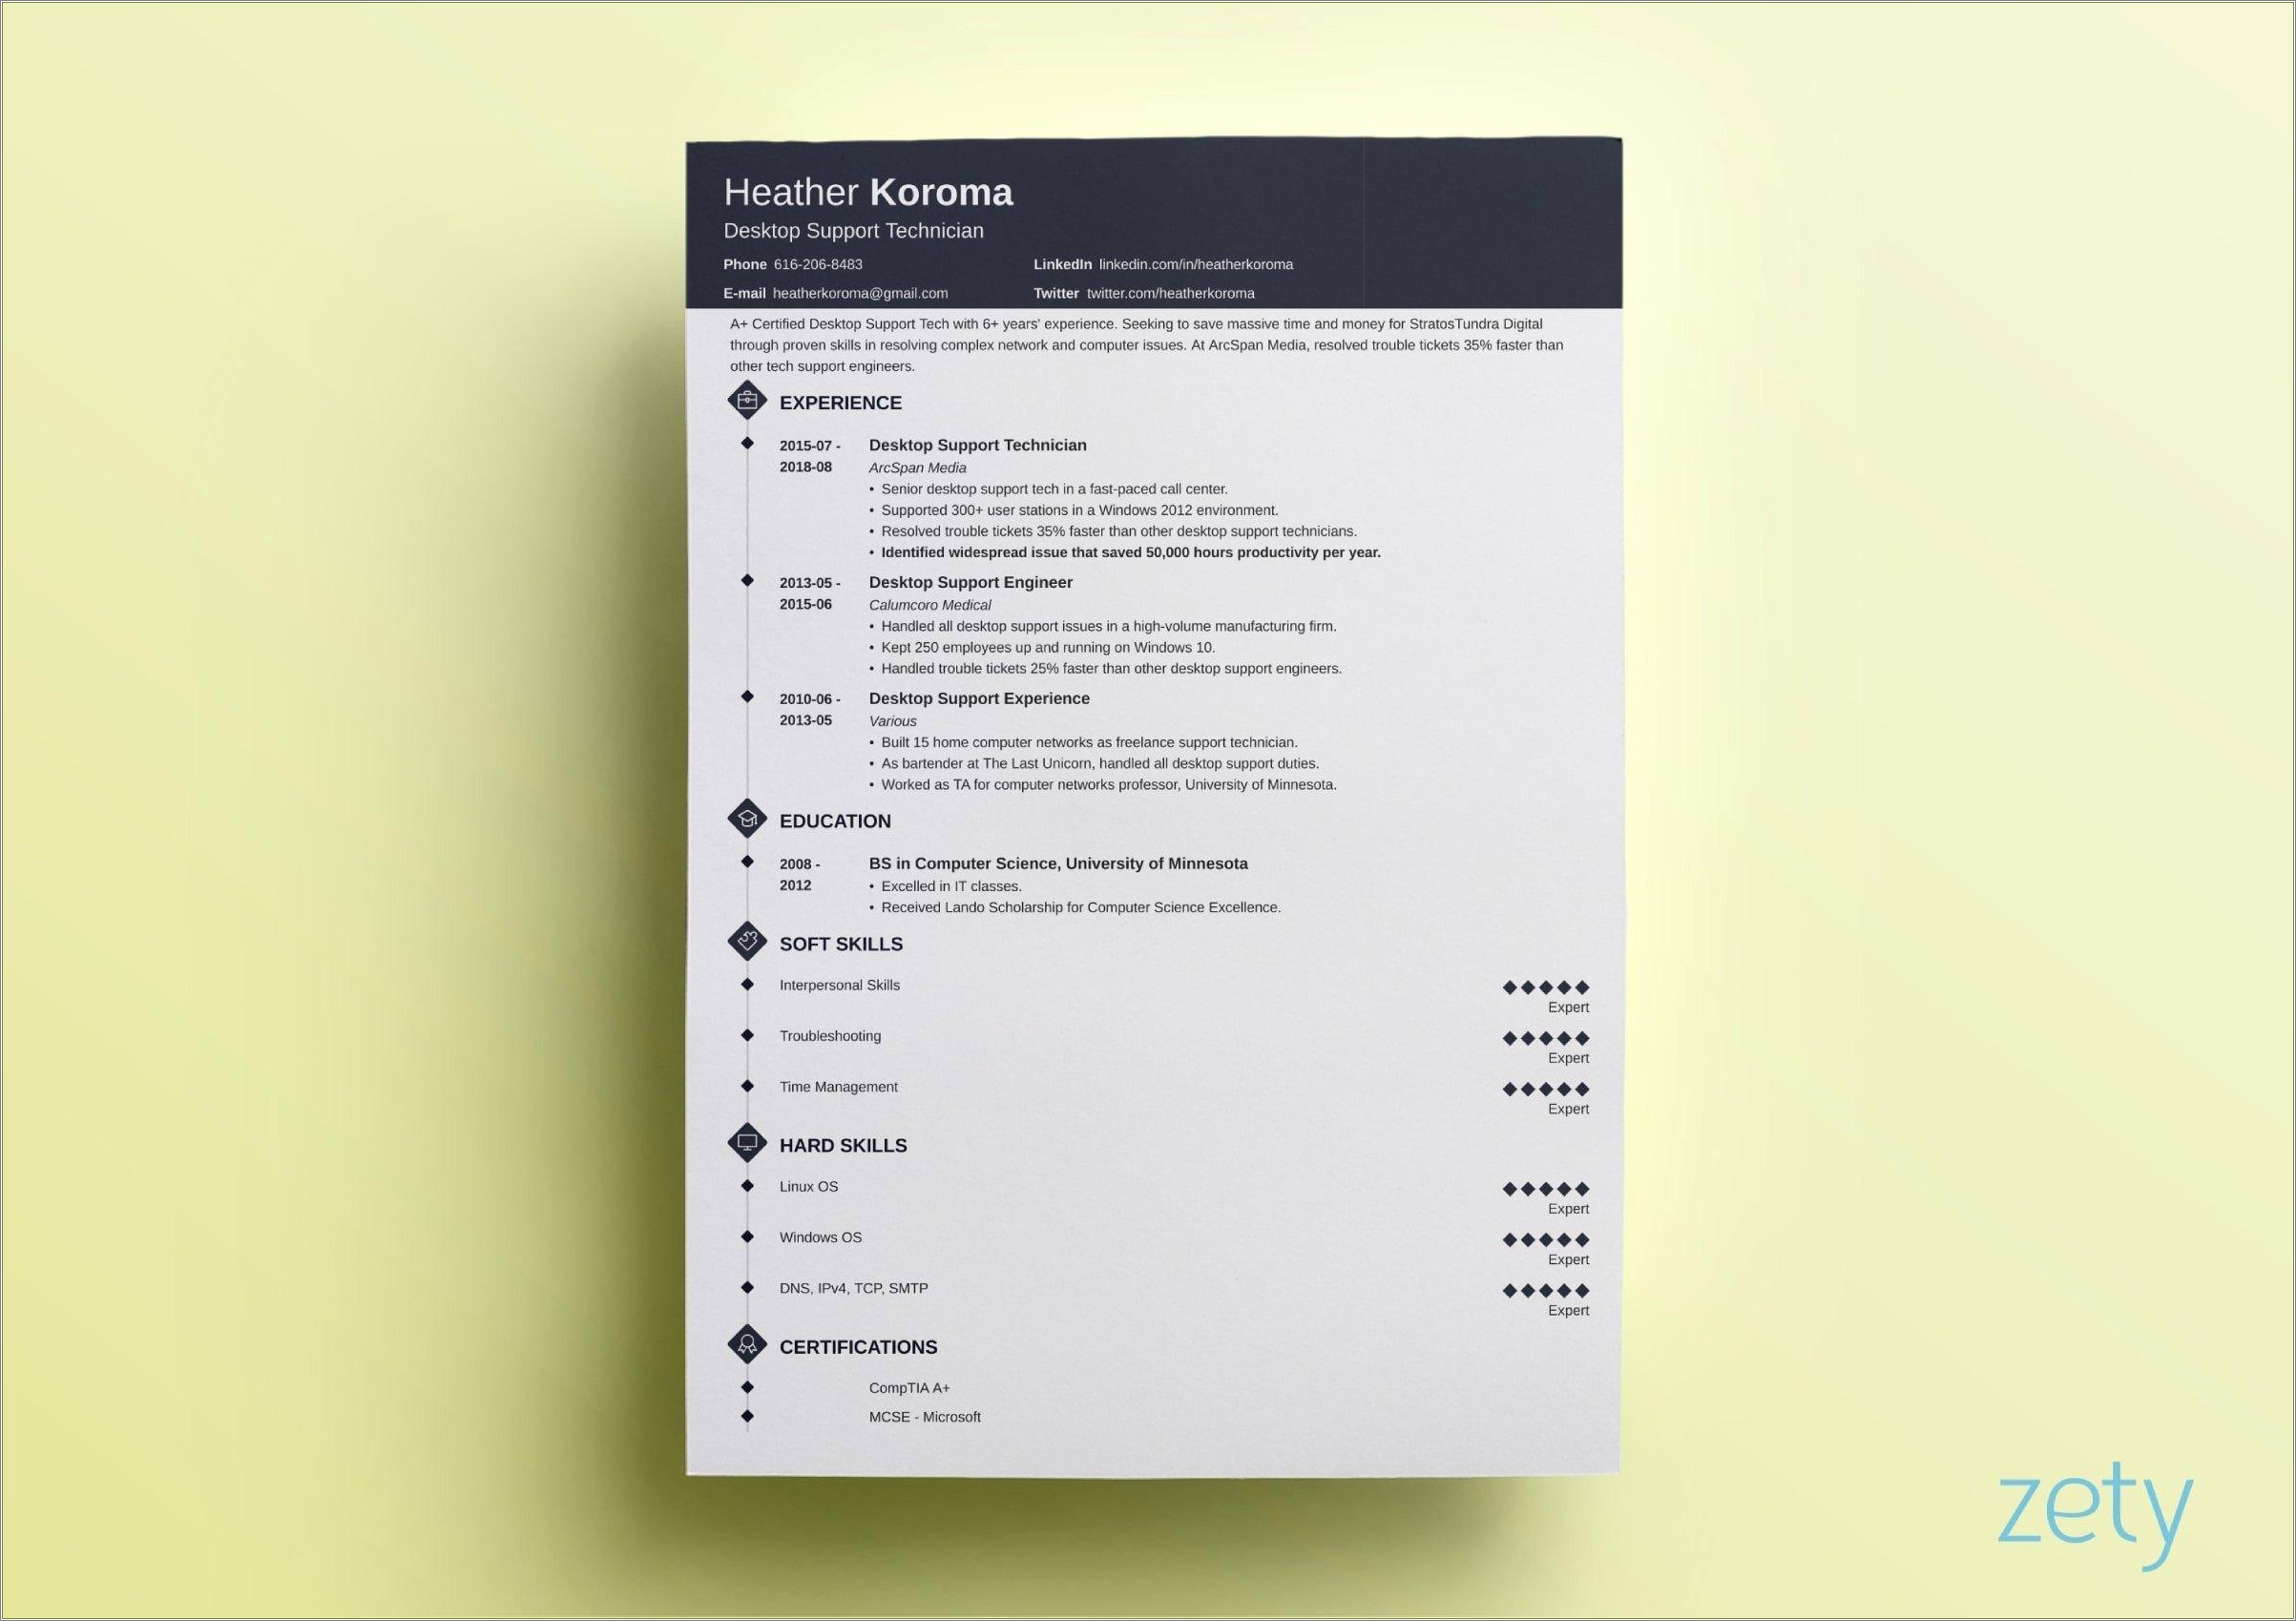 Resume Template Less Than 1047586 Bytes Of Storage